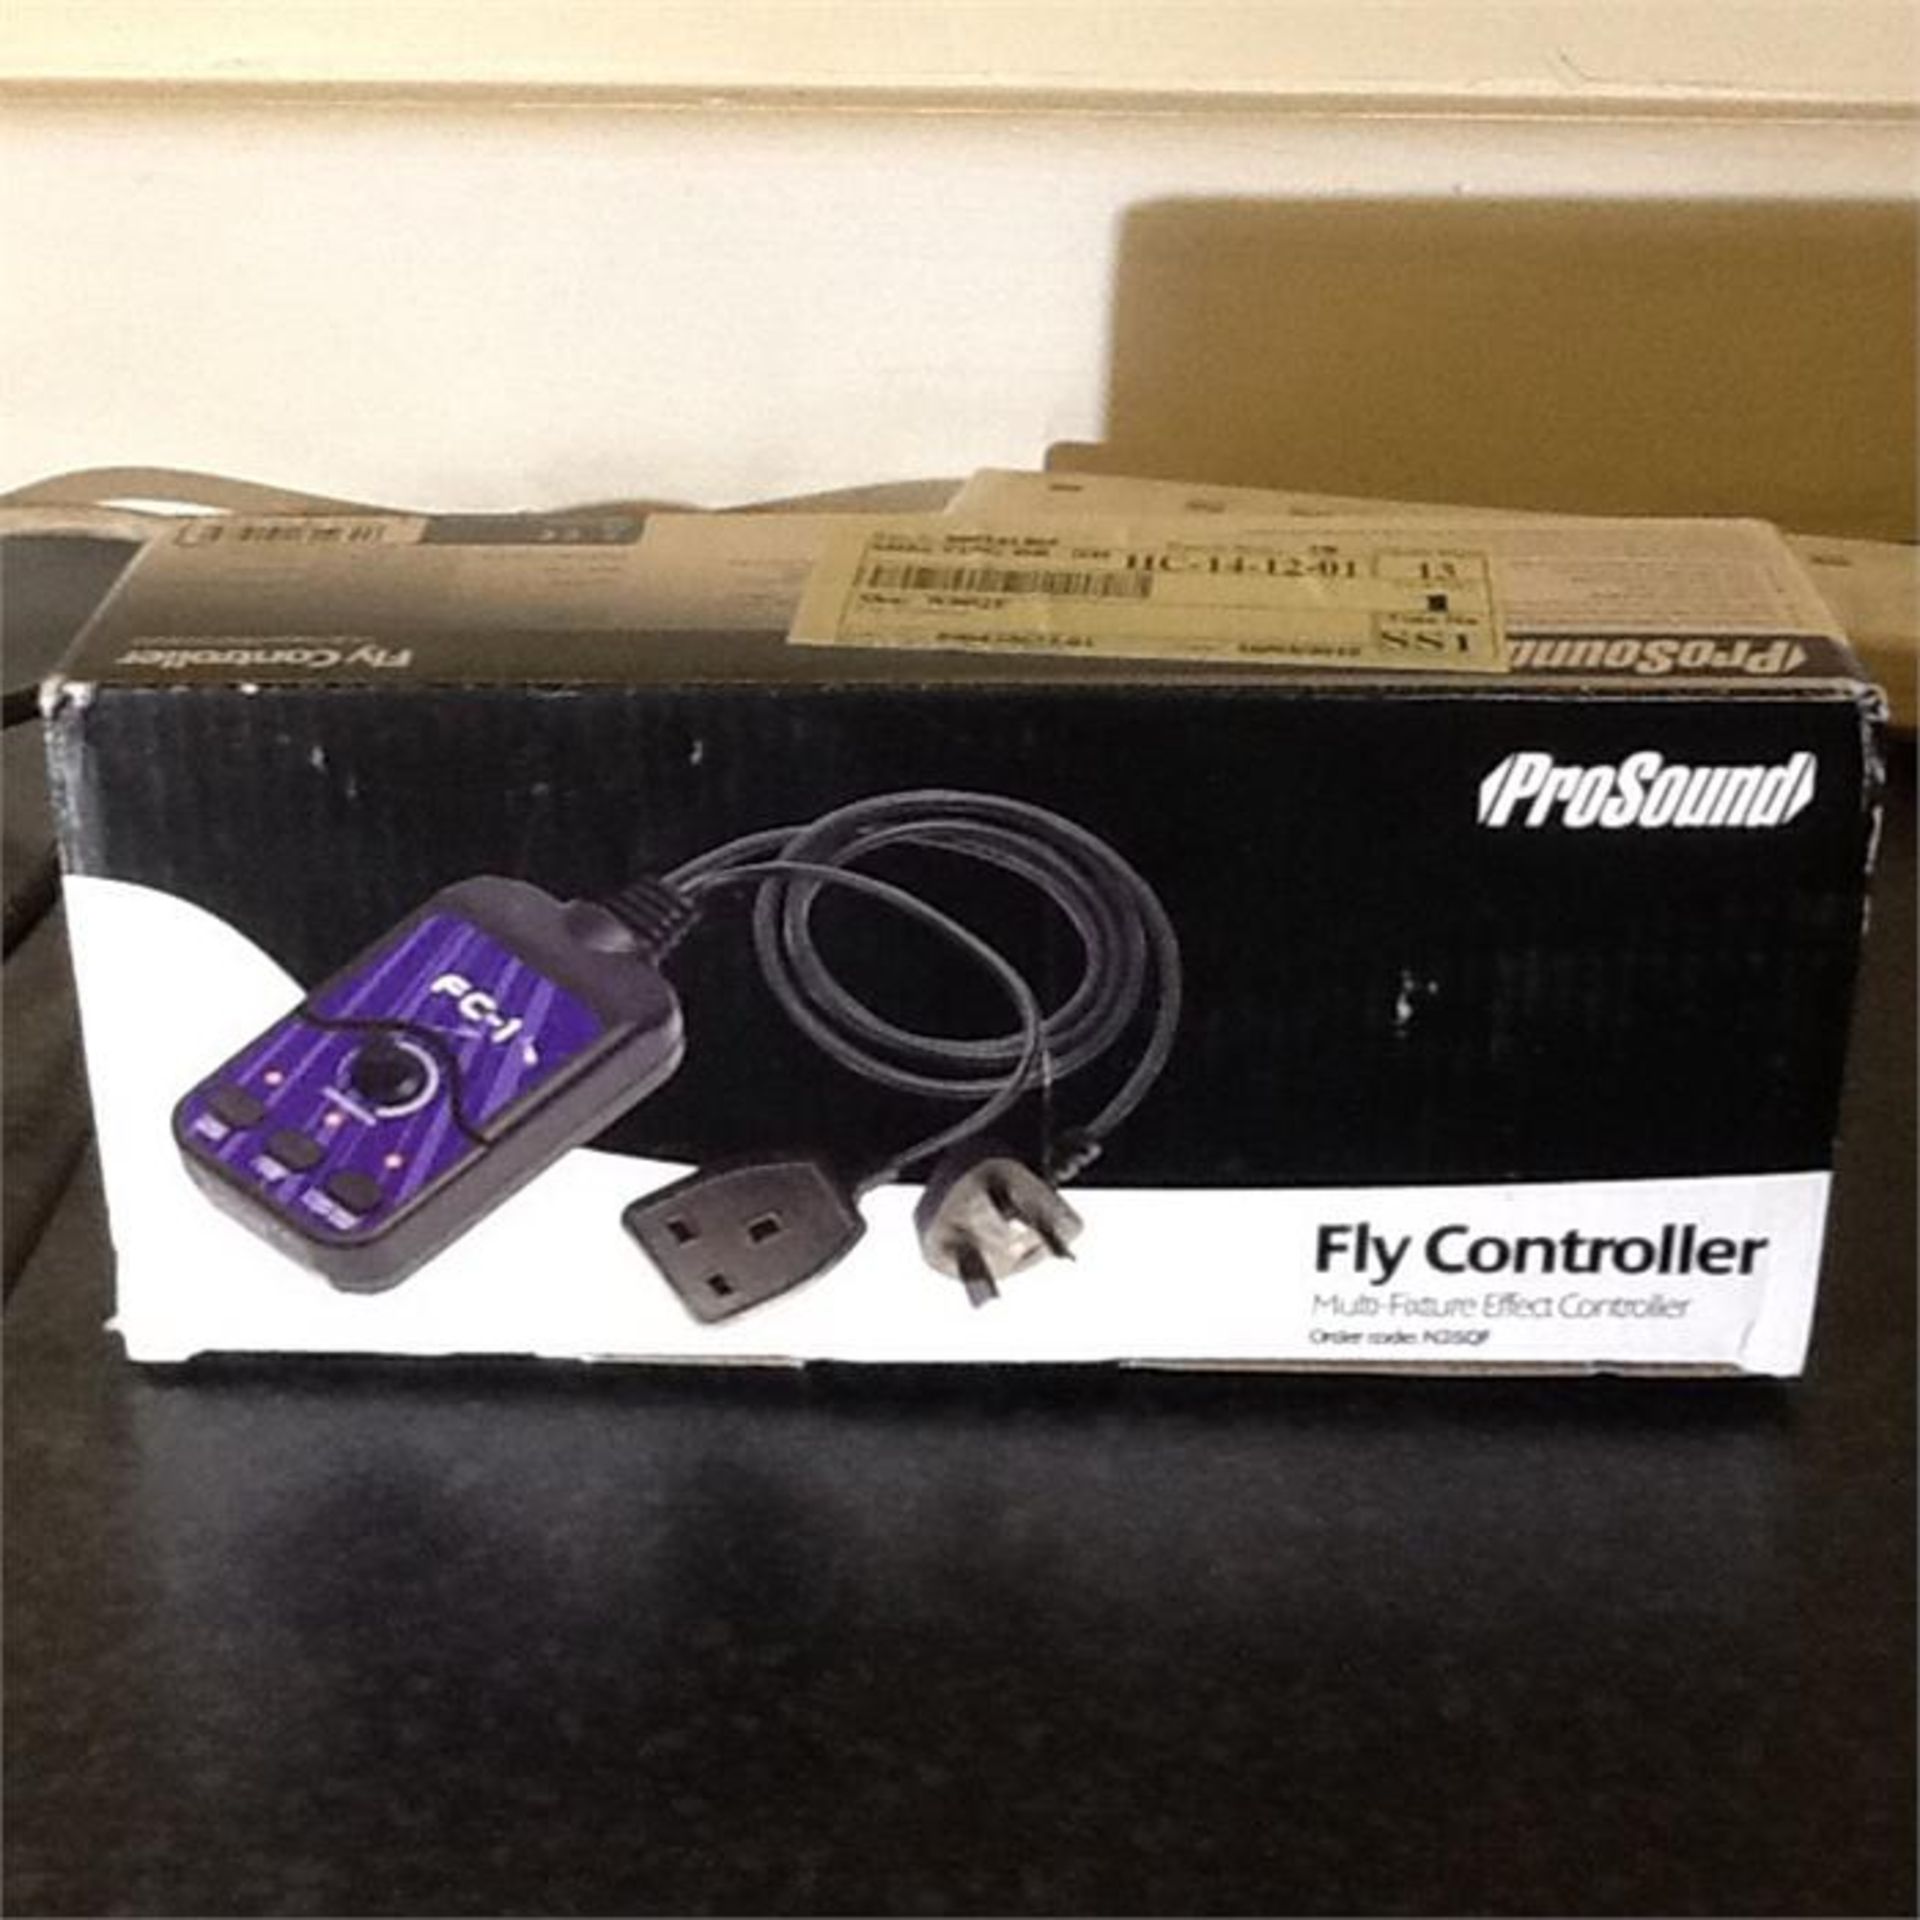 Prosound fly controller. Boxed - Image 3 of 5